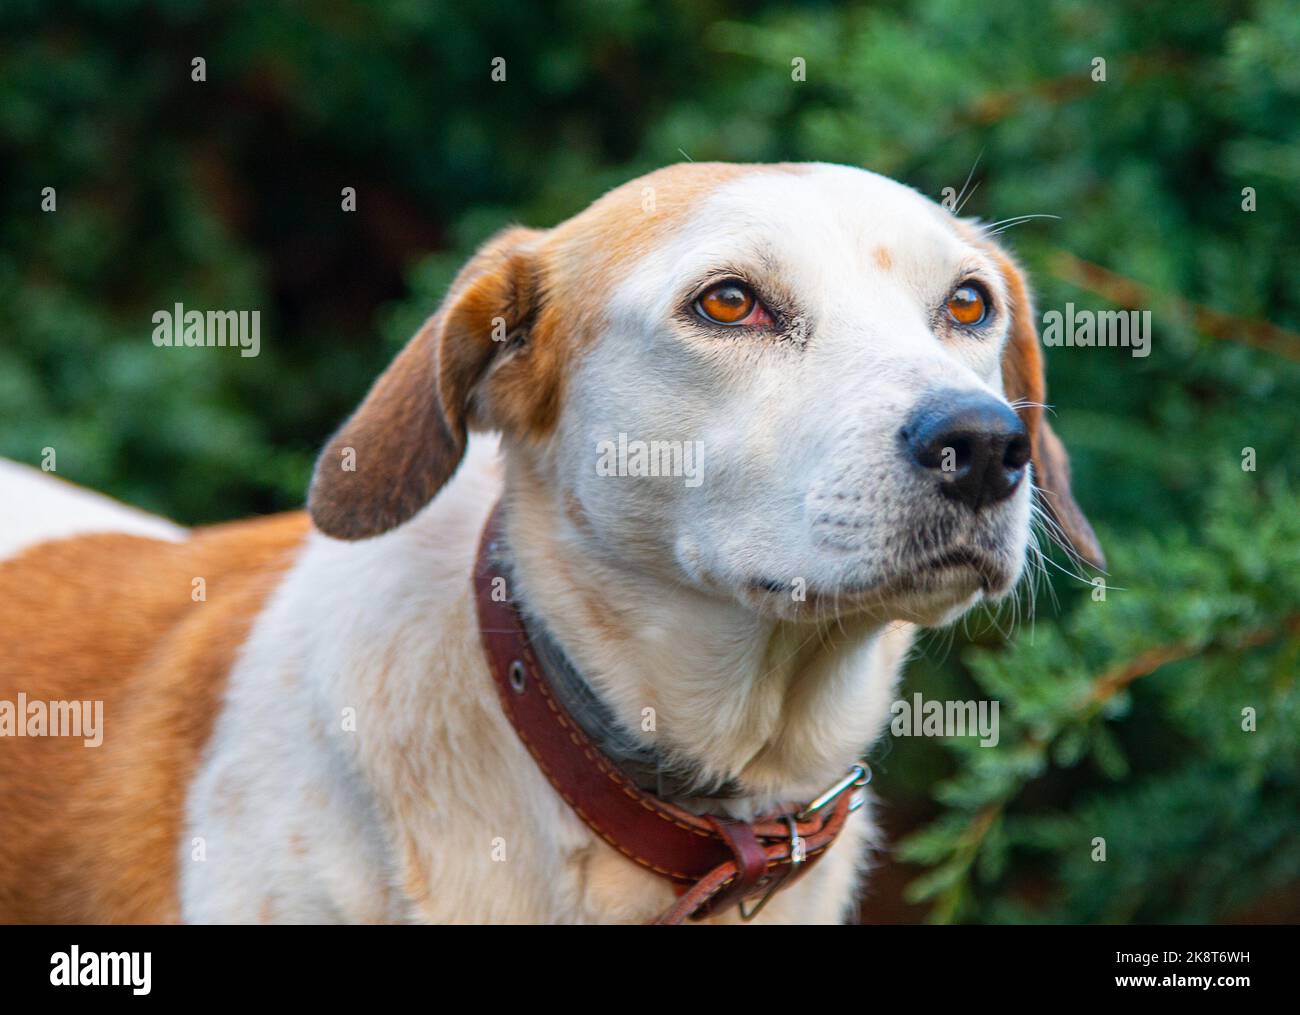 Old sad Istrian Shorthaired Hound dog standing in wood Stock Photo